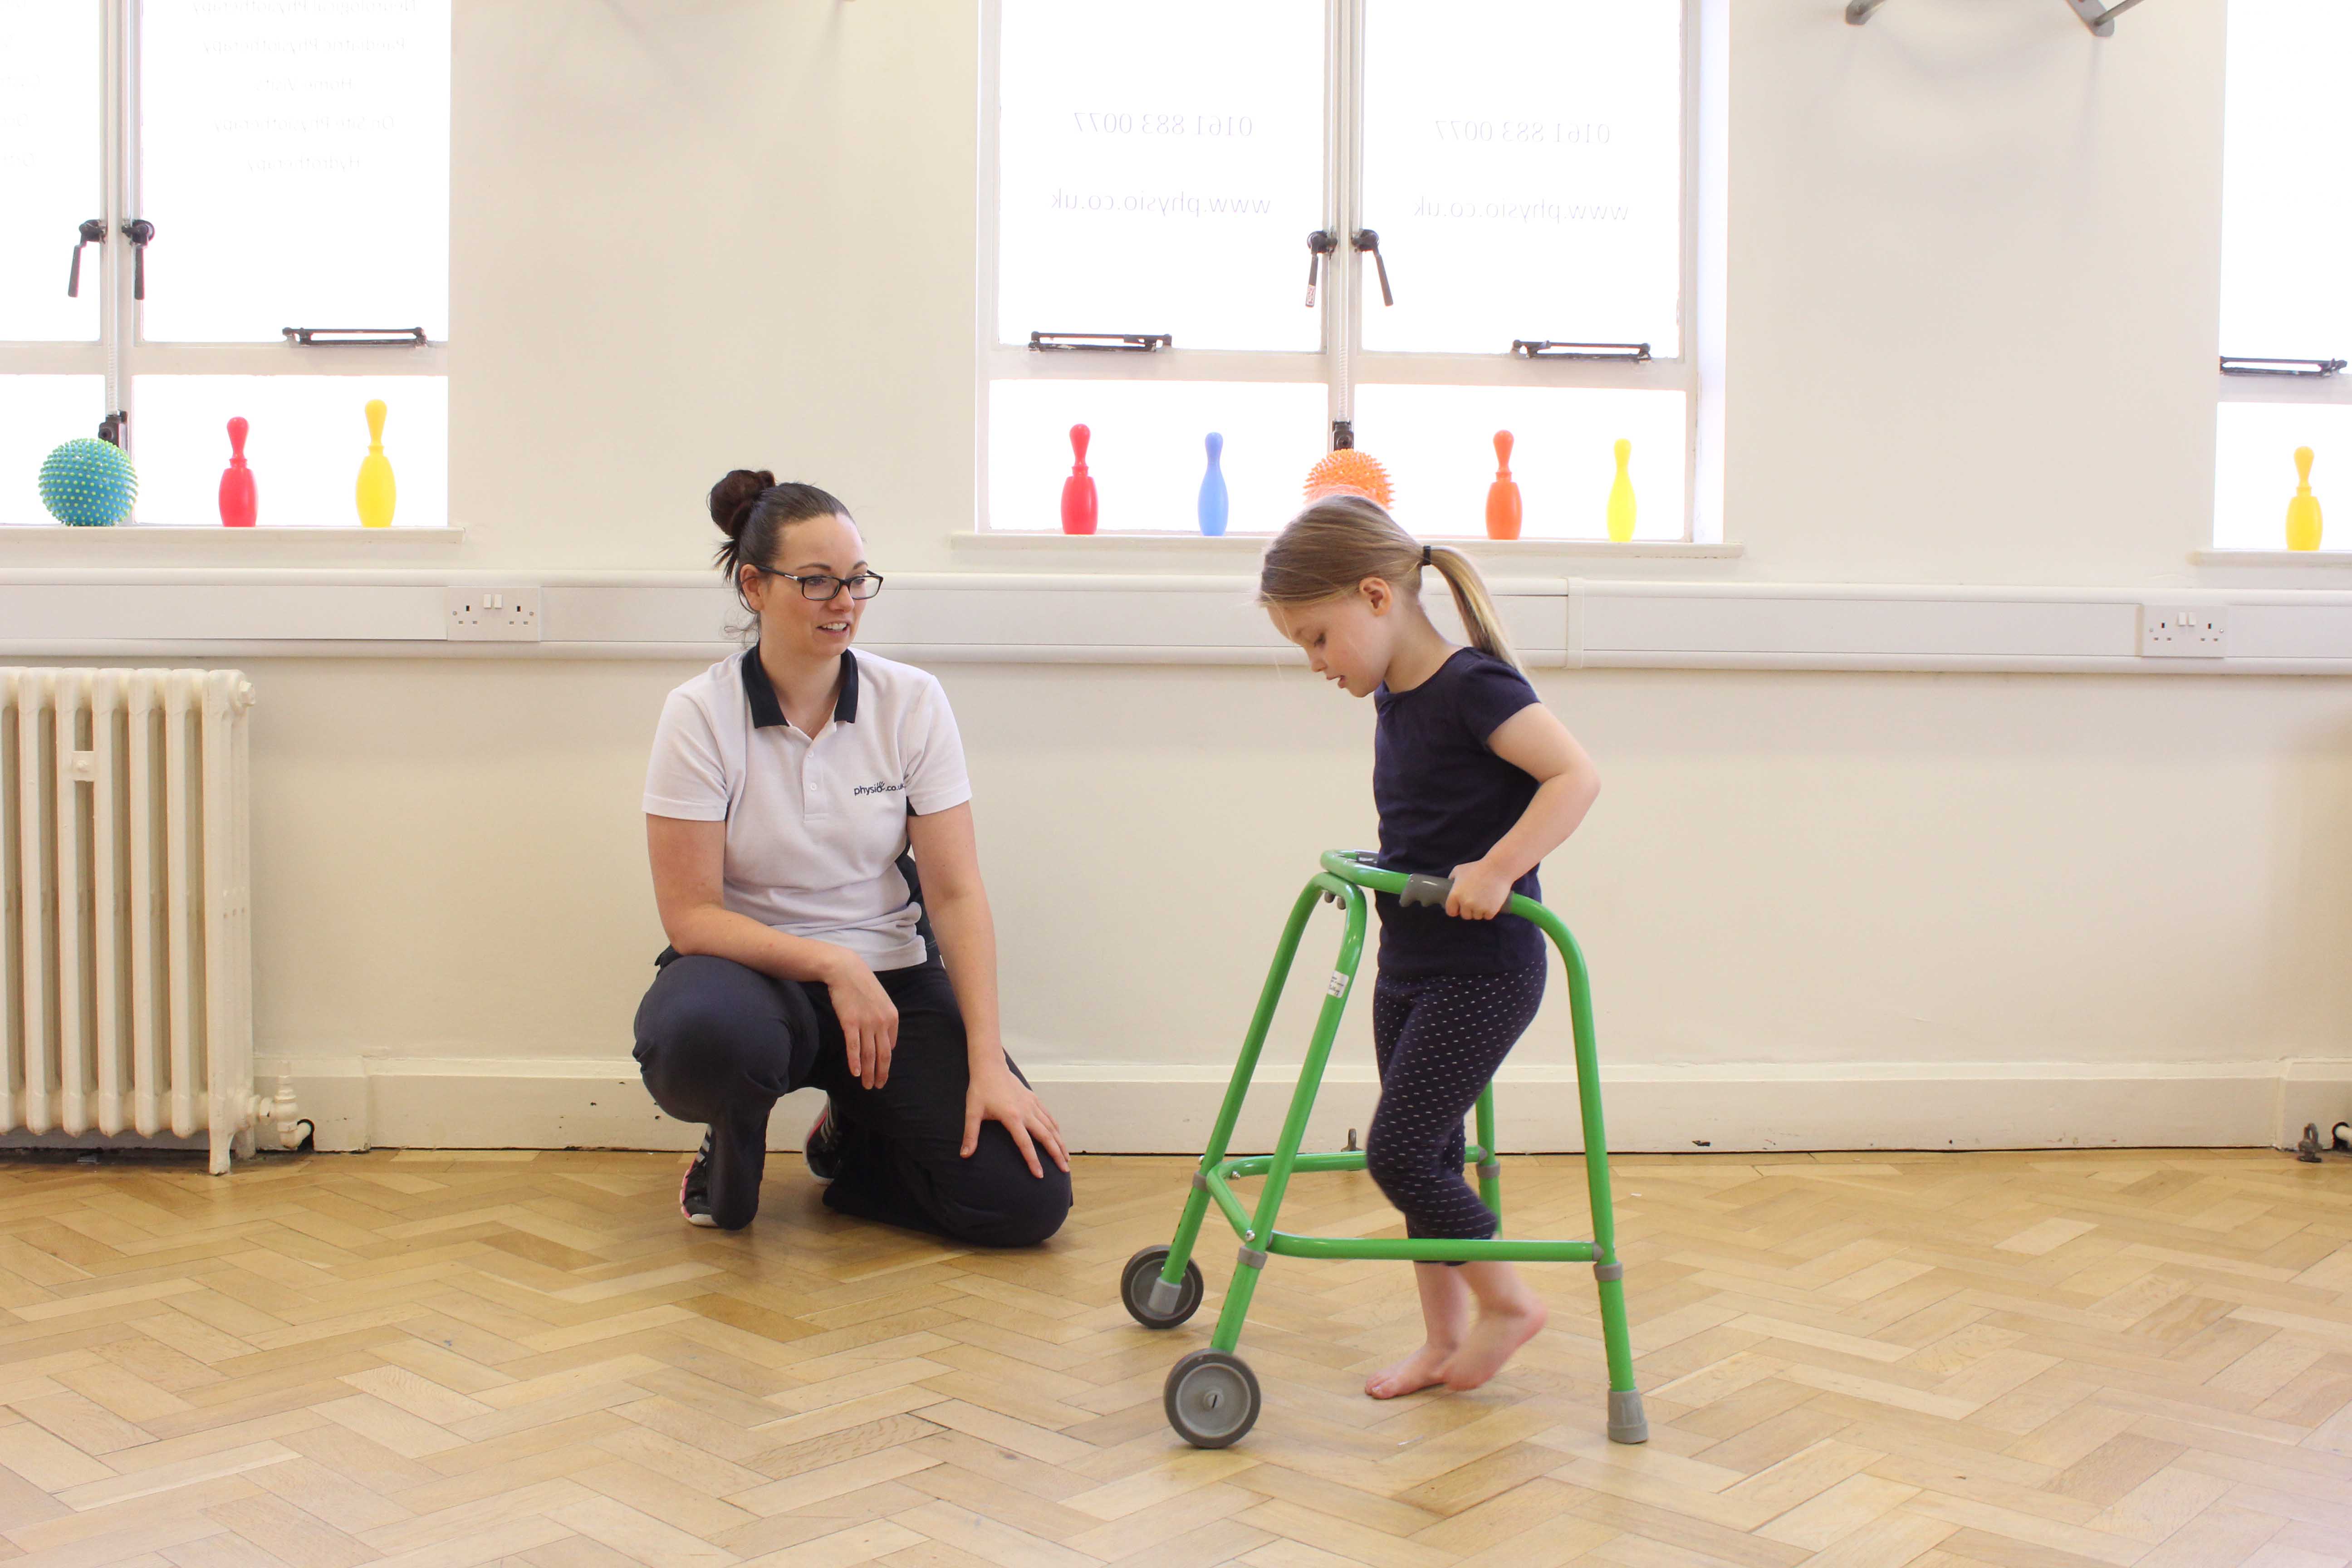 Gait re-education using a wheeled walking frame under close supervision of specilist Paediatric Physiotherapist